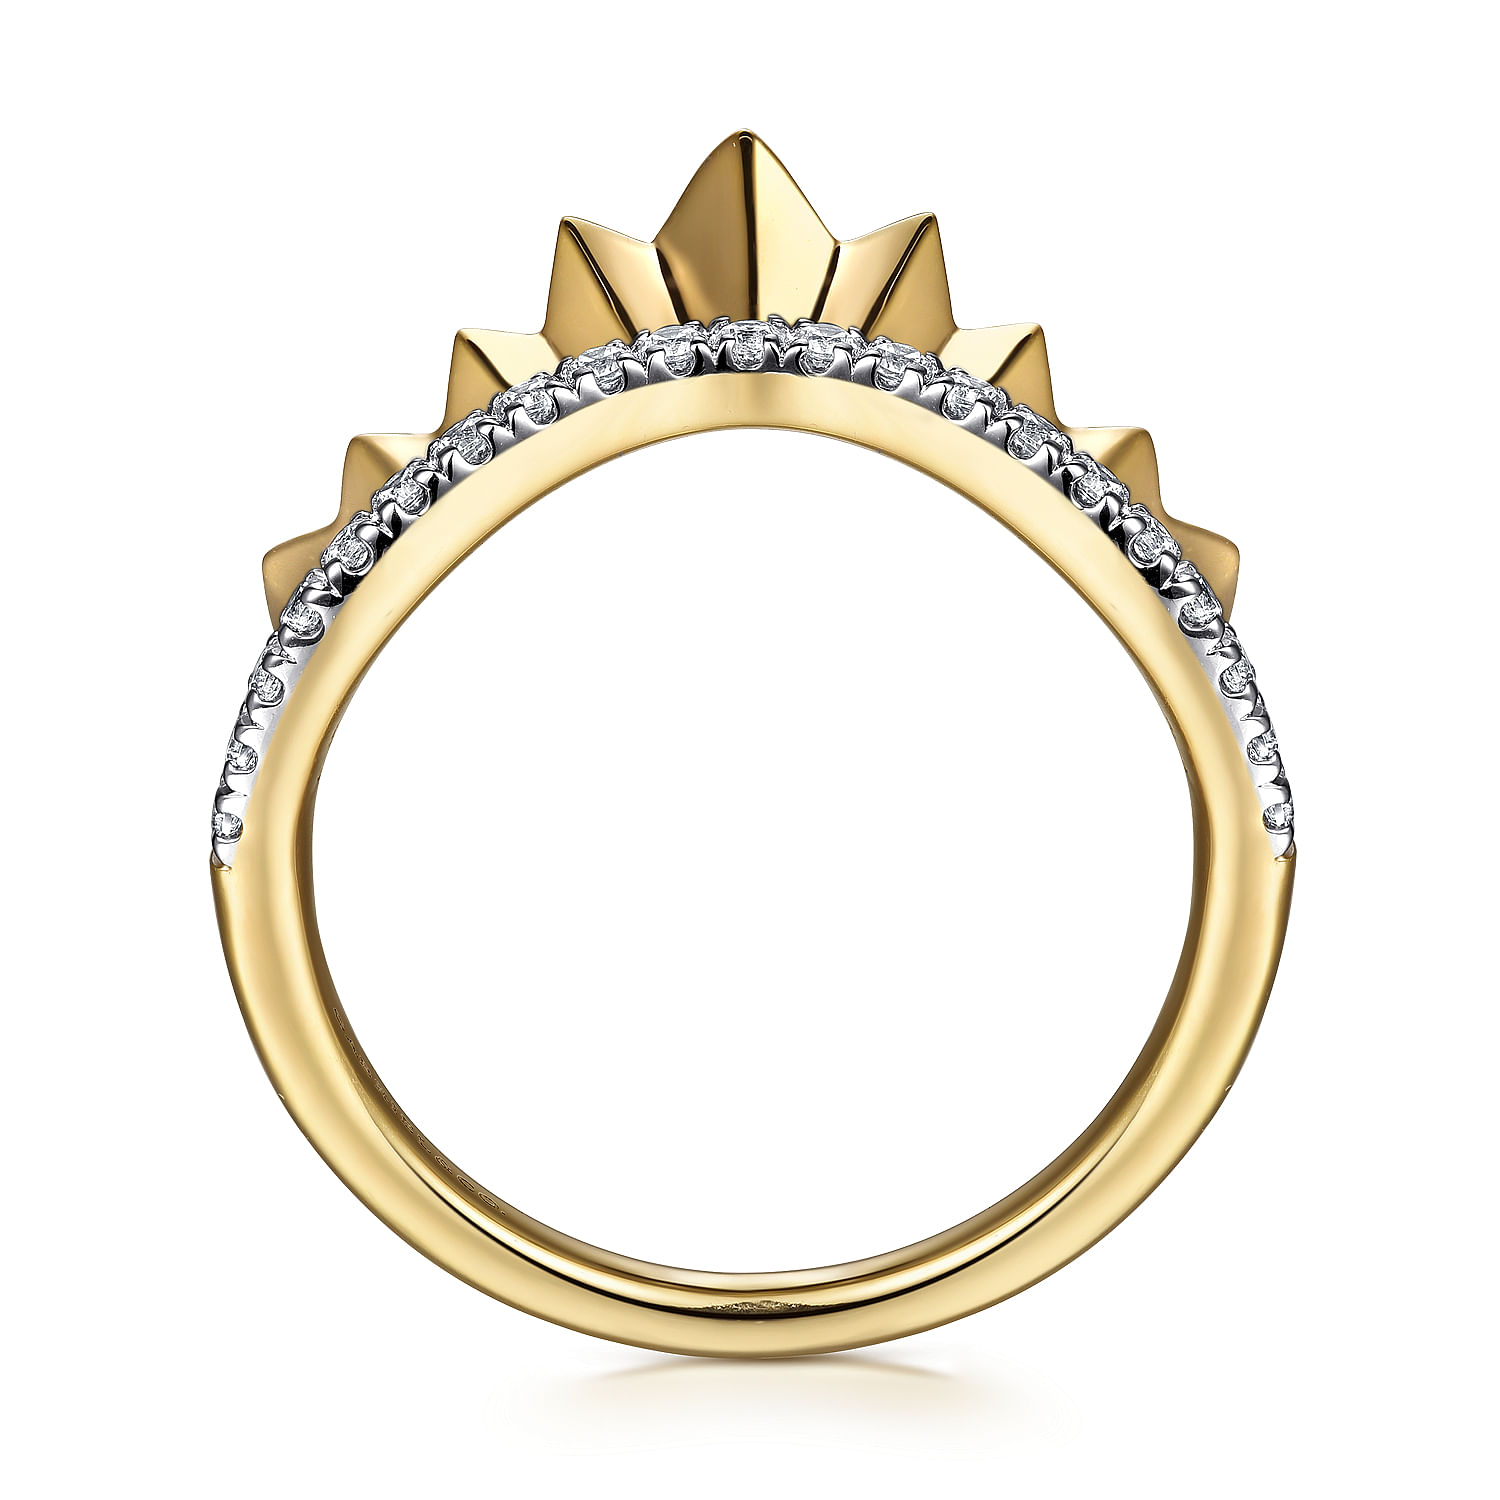 14K Yellow Gold Curved Diamond Ring with Diamond Cut Texture